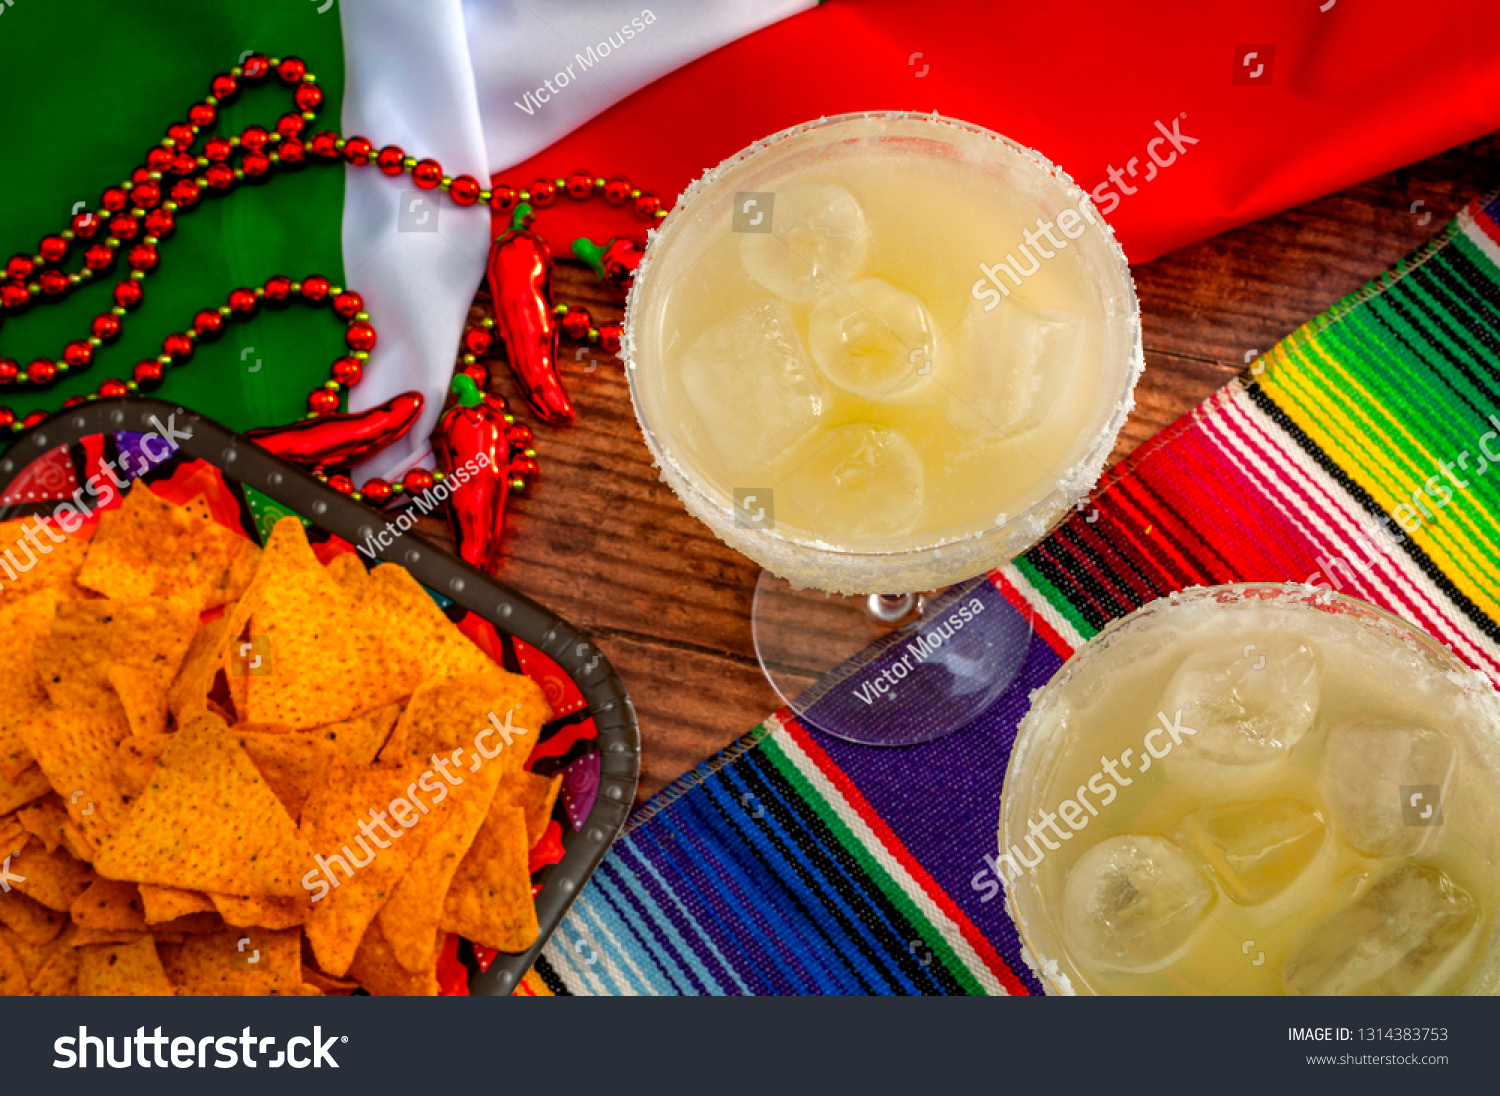 Mexican fiesta and Cinco de Mayo party concept theme with jalapeno pepper beads necklace, traditional rug or serape, two margarita glasses, chips and the flag of Mexico #1314383753